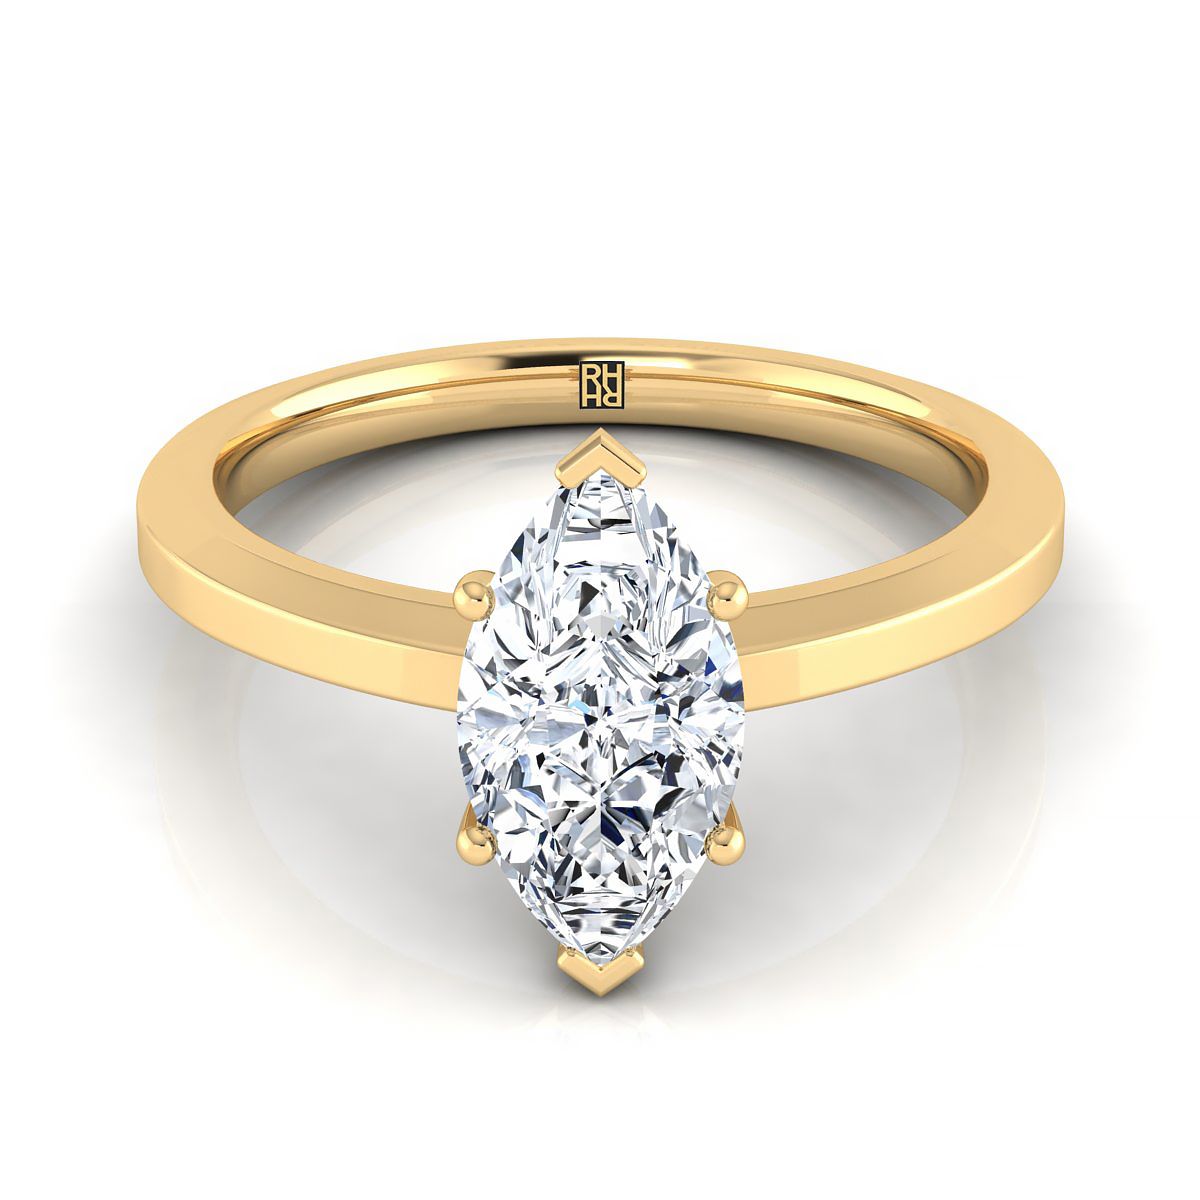 18K Yellow Gold Marquise   Beveled Edge Comfort Style Bright Finish Solitaire Engagement Ring